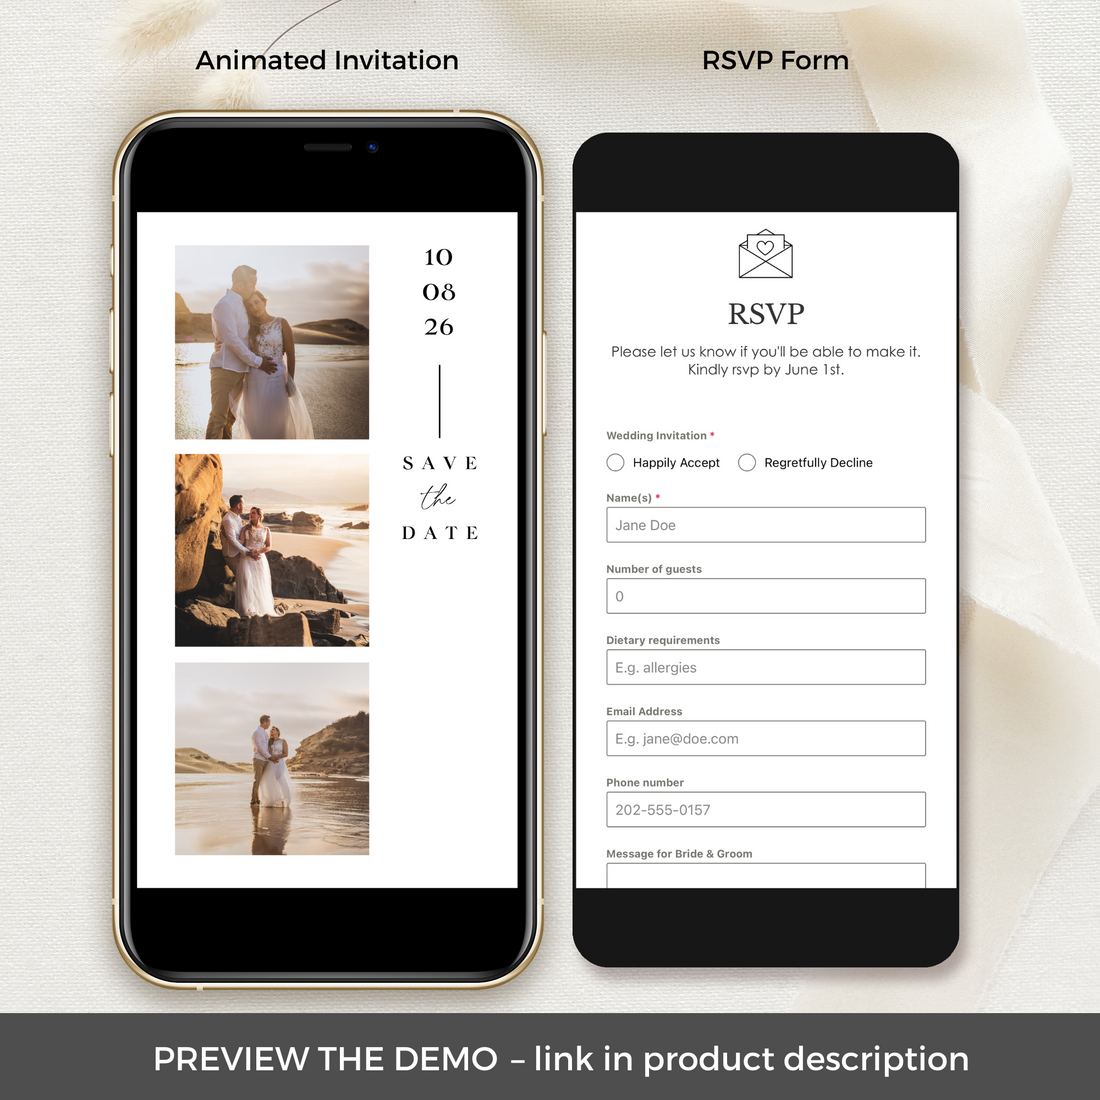 Online Animated Save the Date with Rsvp - Choose Any Design